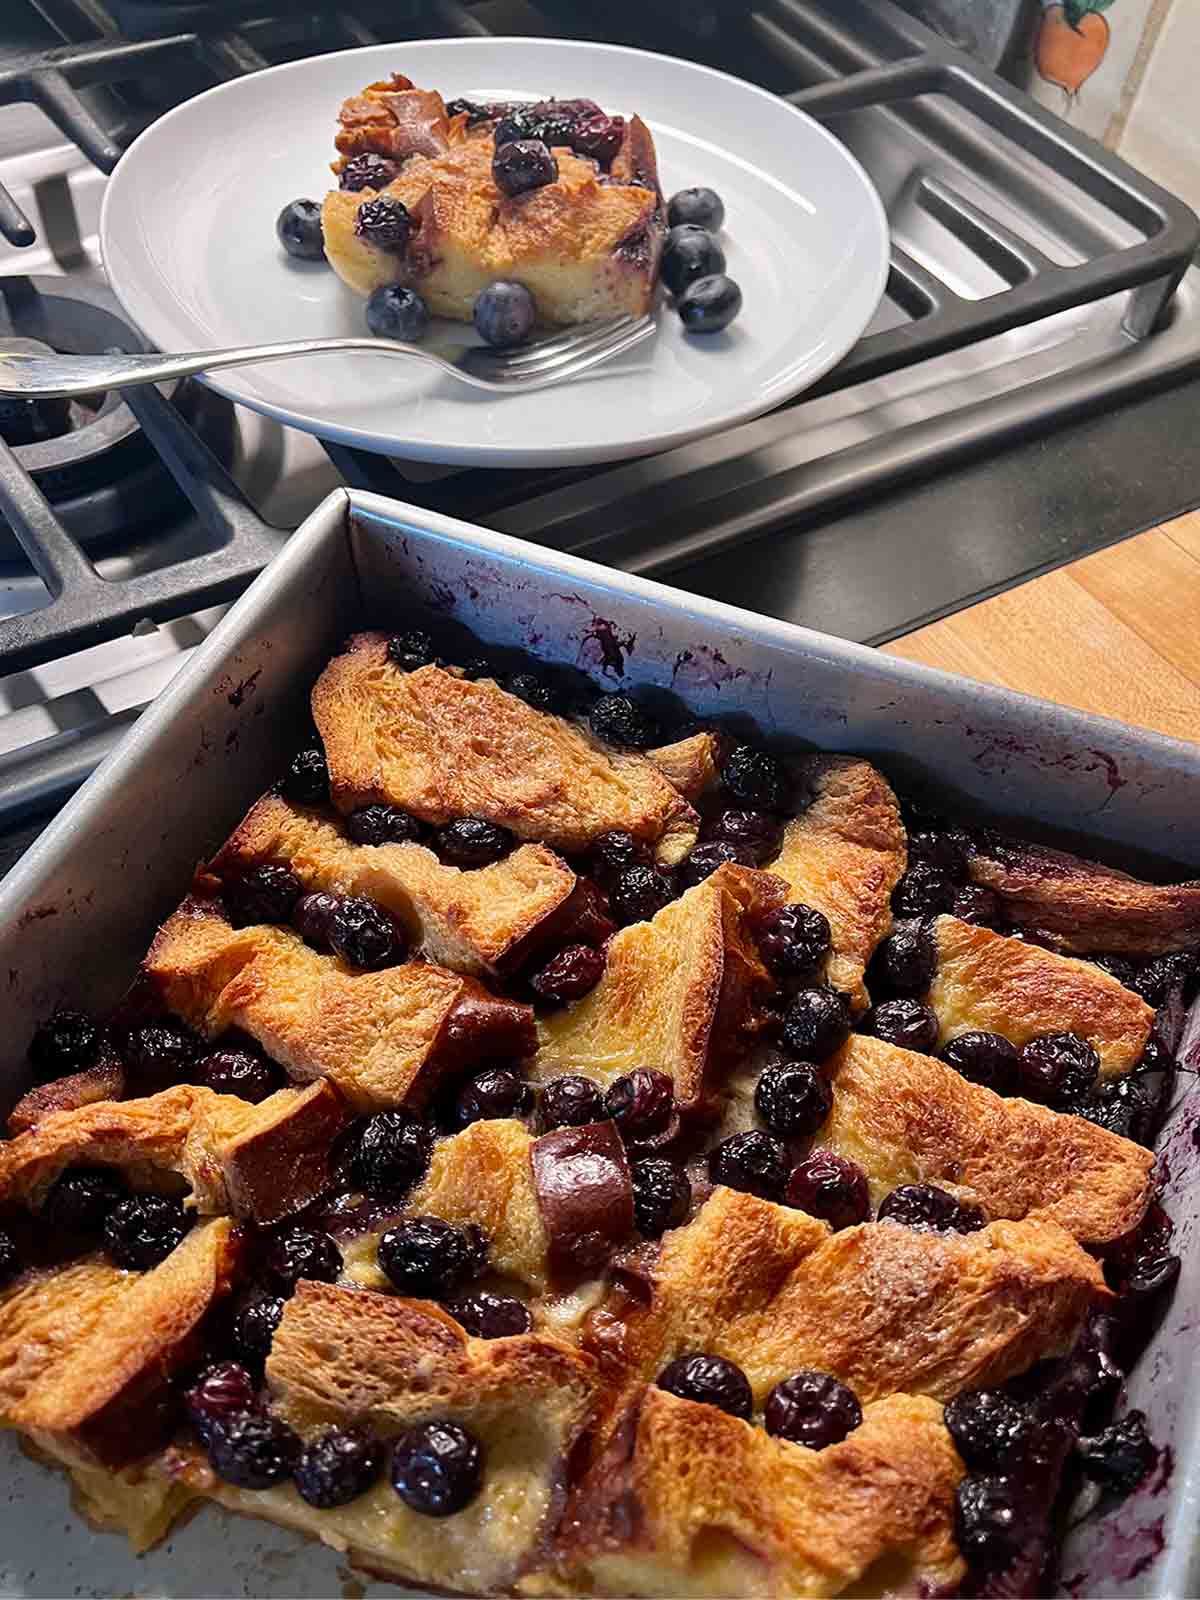 Half of a rectangular pan of blueberry brioche French toast casserole next to a gas range with a serving of the casserole on a white plate.